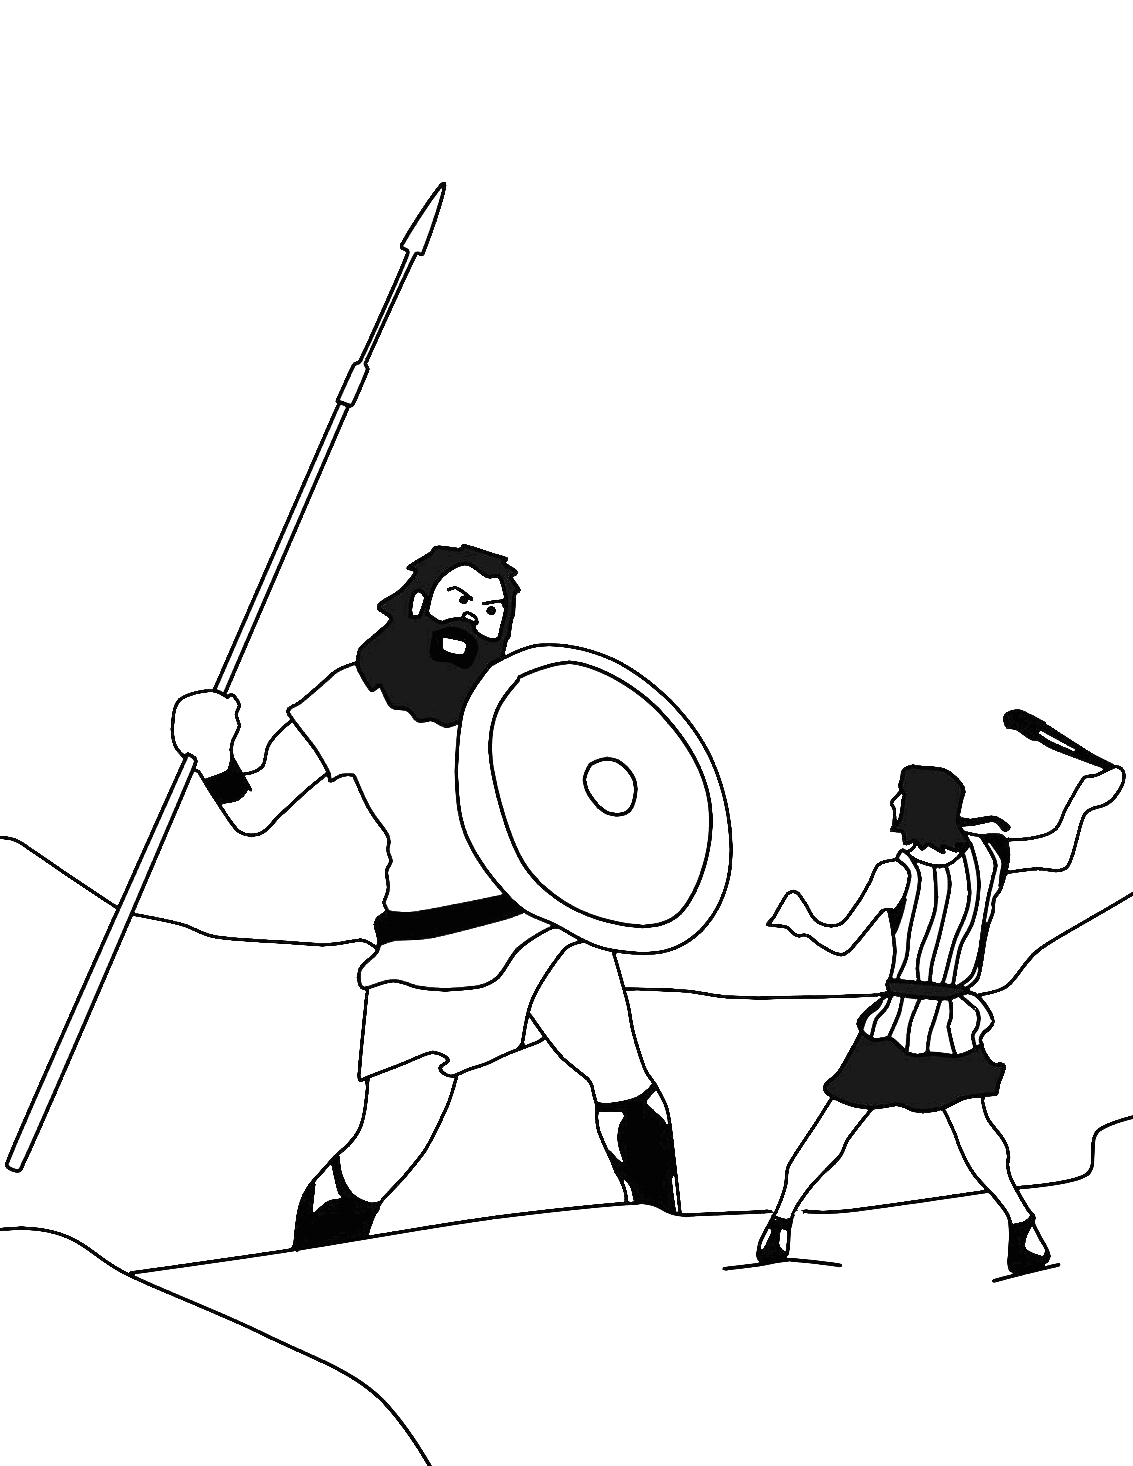 David And Goliath Fighting Coloring Page - Free Printable Coloring ...